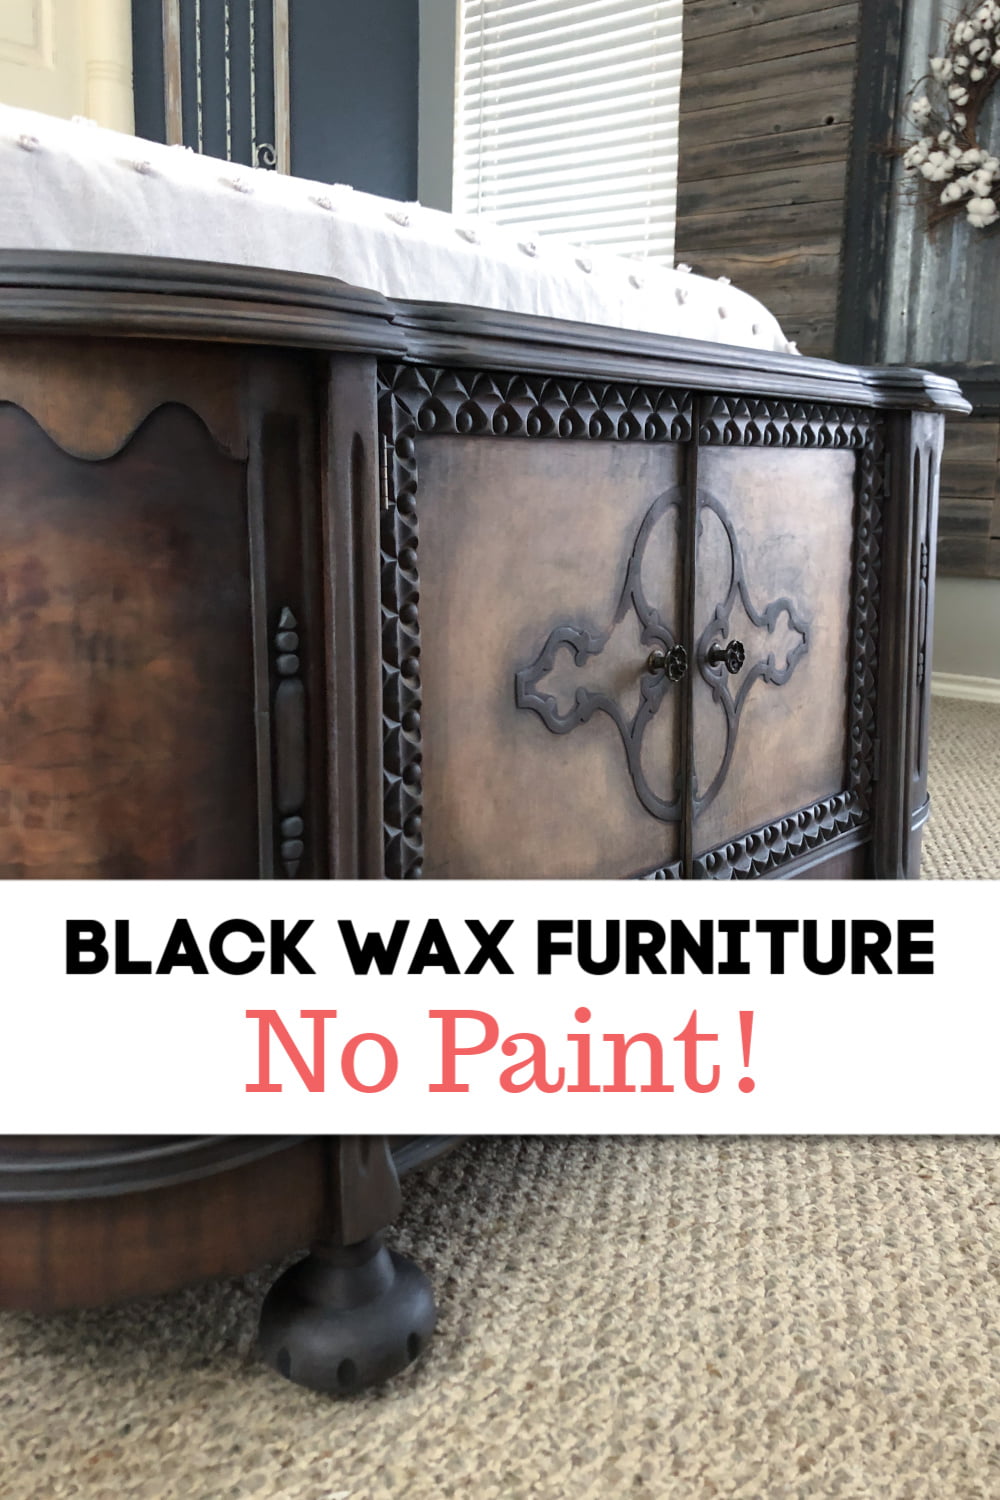 How to Use Black Wax for a Warehouse Look - Techniques